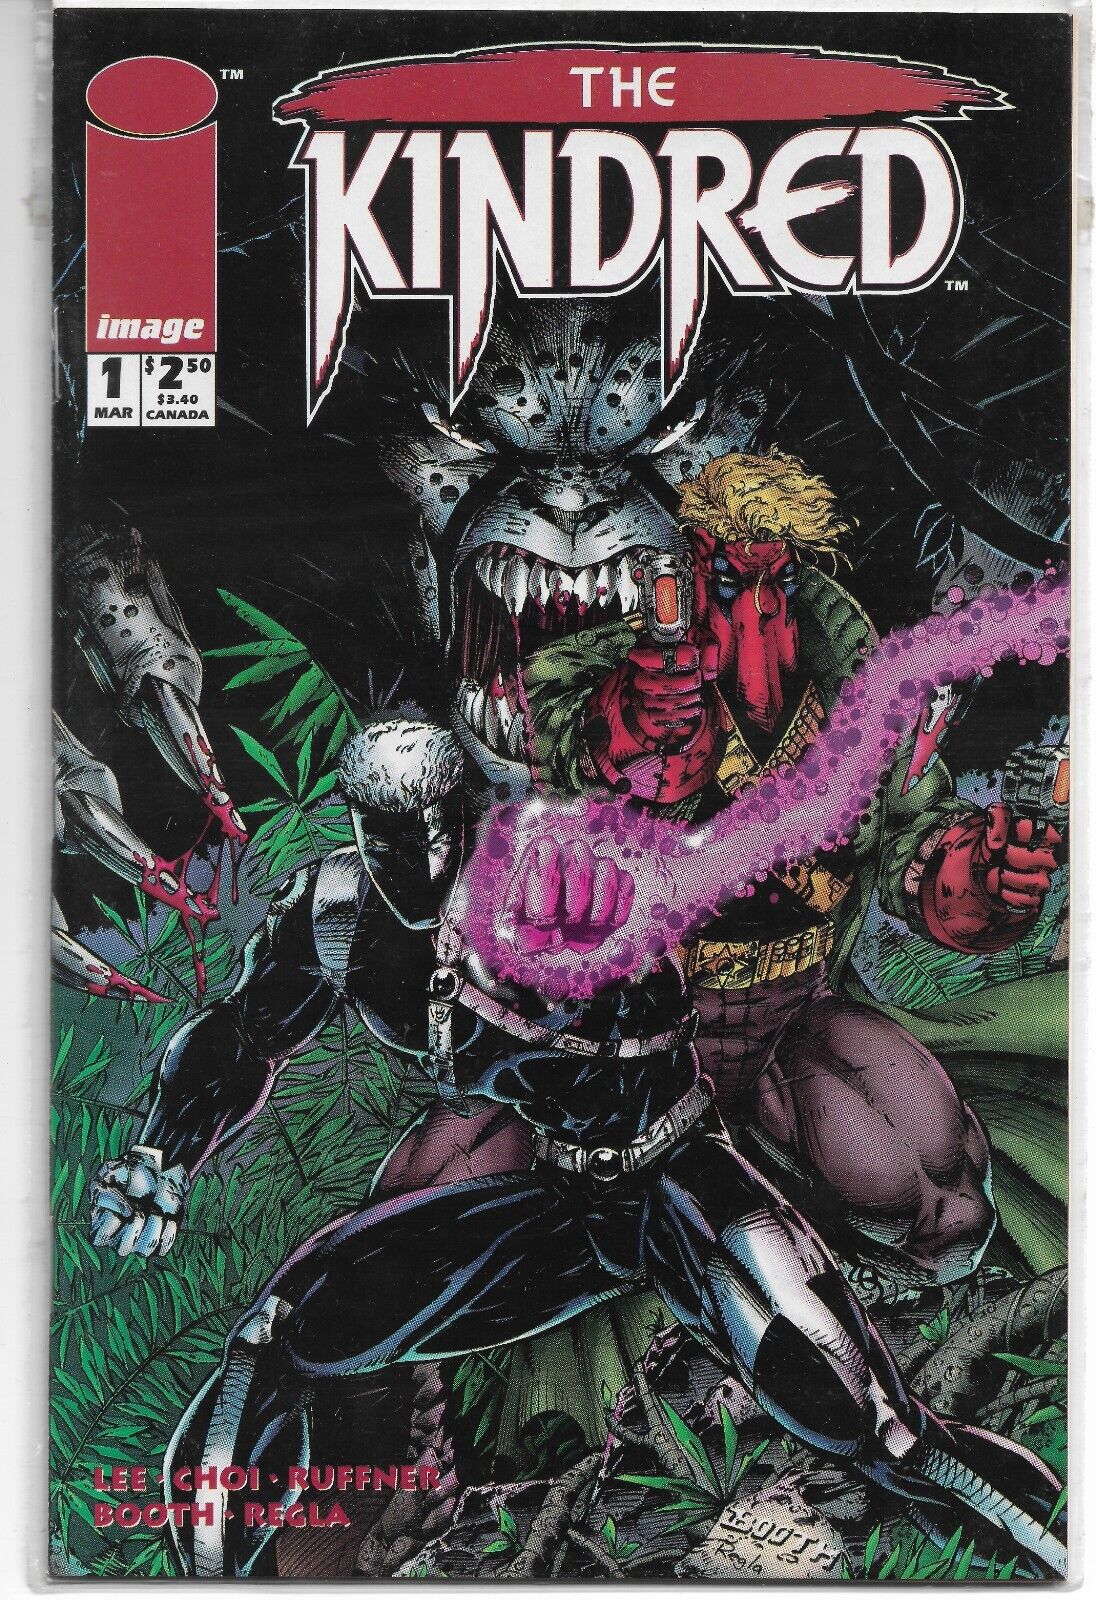 THE KINDRED #1 - 1994 Image Comics